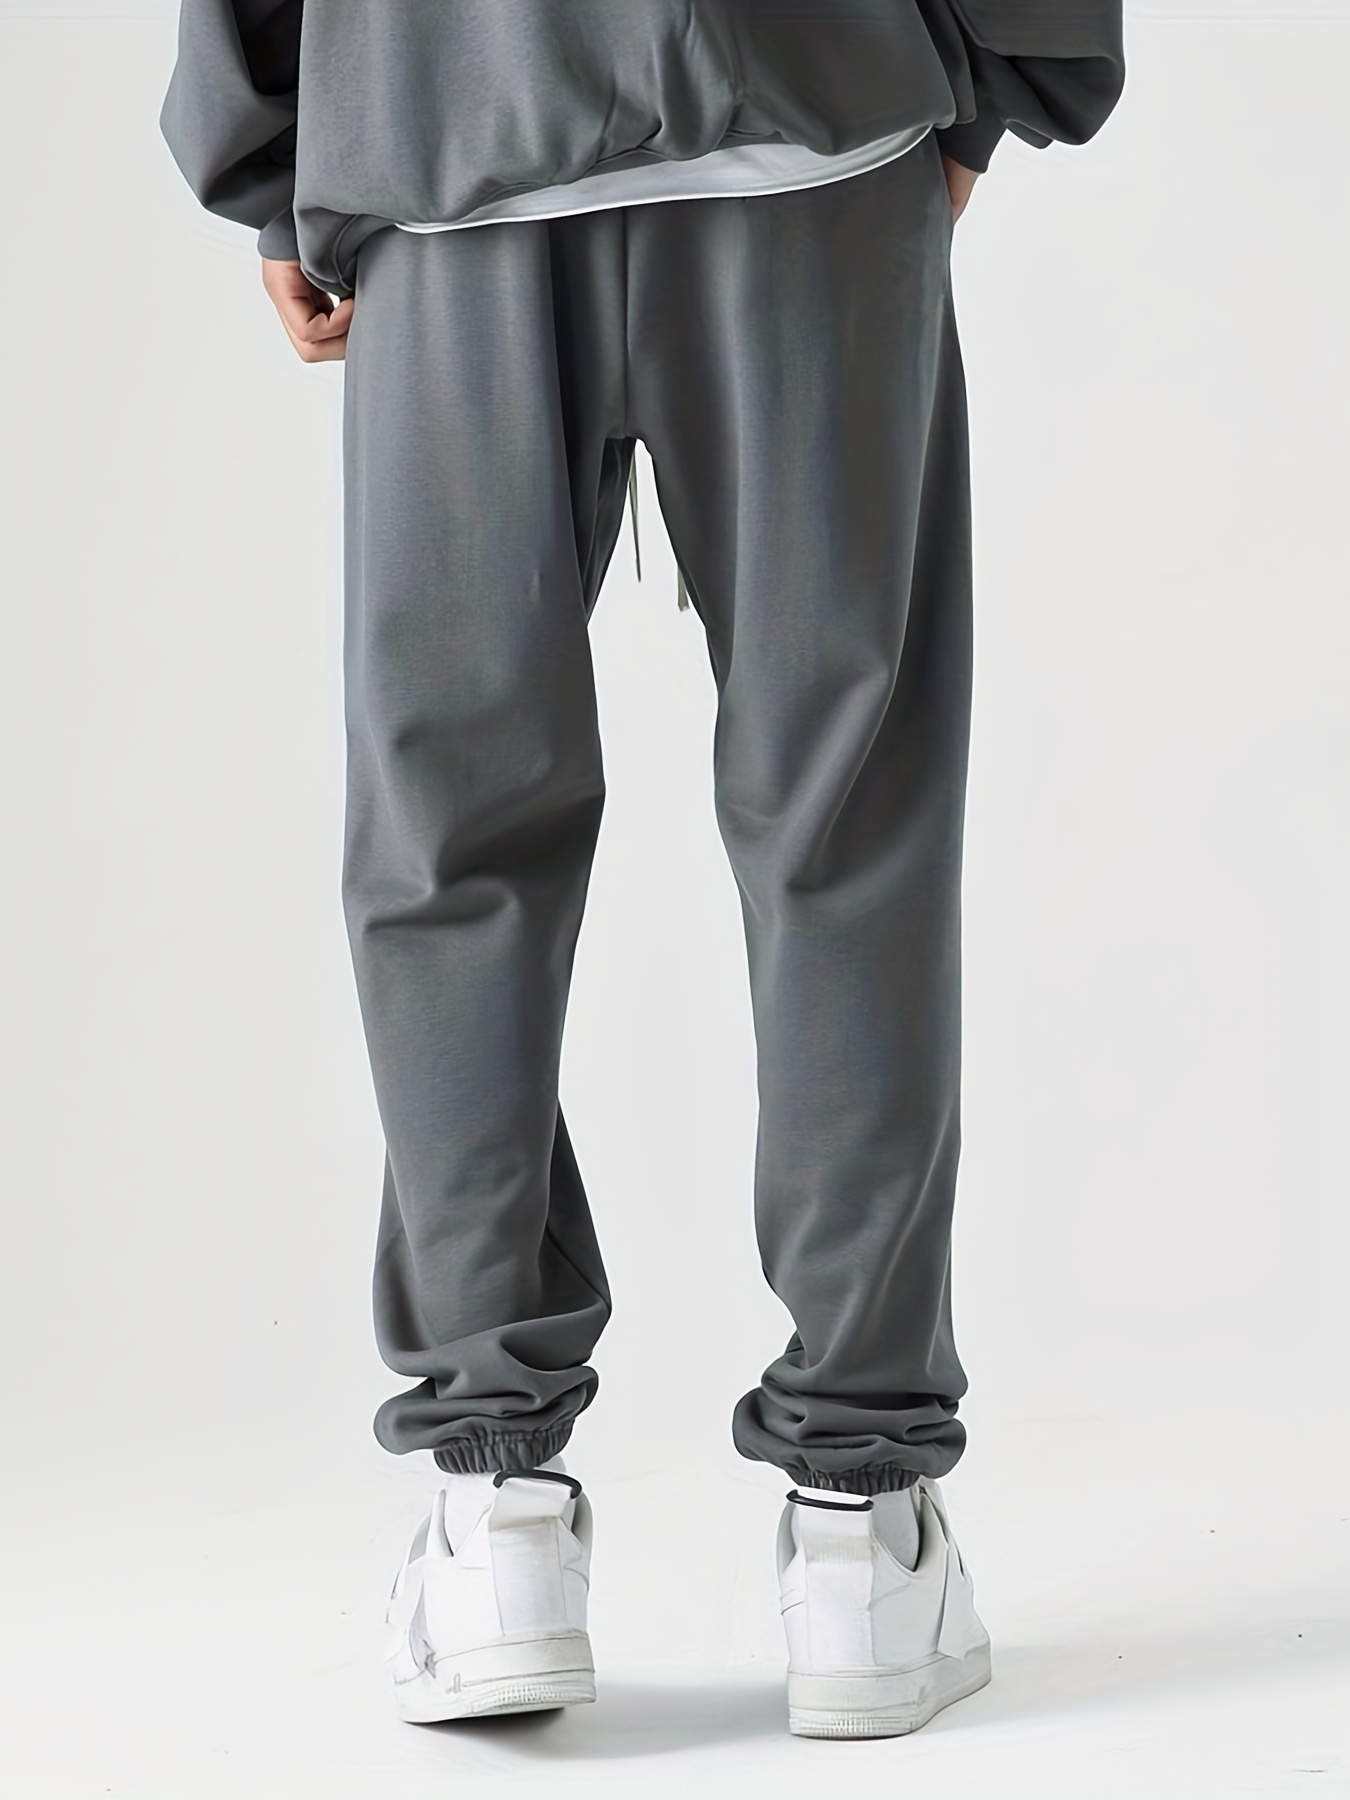 Premium Sweatpants for Every Occasion, 8 oz./yd² (US), 50/50  Cotton/Polyester, Unmatched Comfort Meets Versatility Trendy Sweatpants, Stay Cozy in Luxurious feel with RADYAN's Stylish & Breathable Sweatpants, RADYAN®